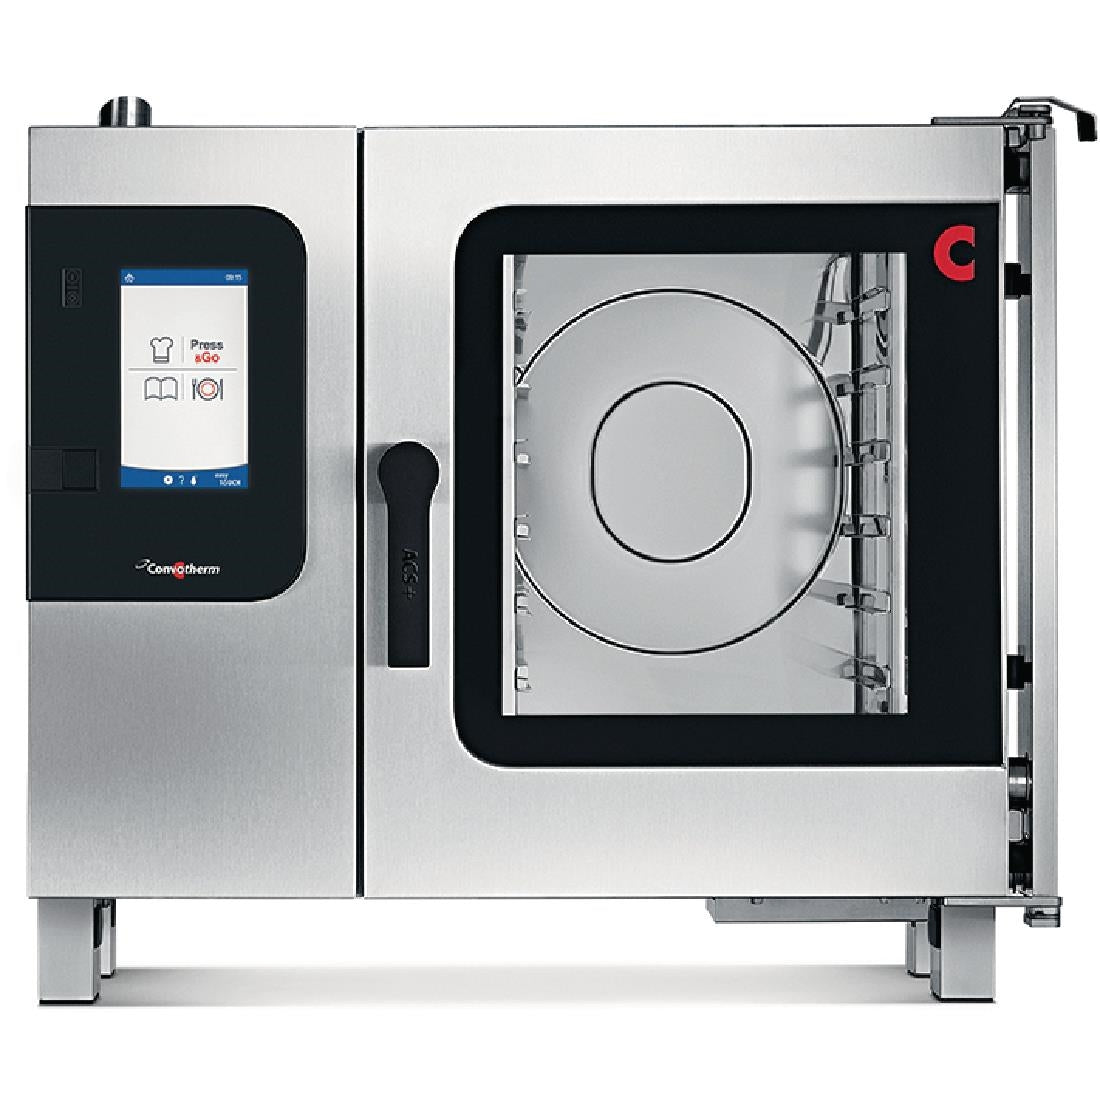 HC253-MO Convotherm 4 easyTouch Combi Oven 6 x 1 x1 GN Grid JD Catering Equipment Solutions Ltd